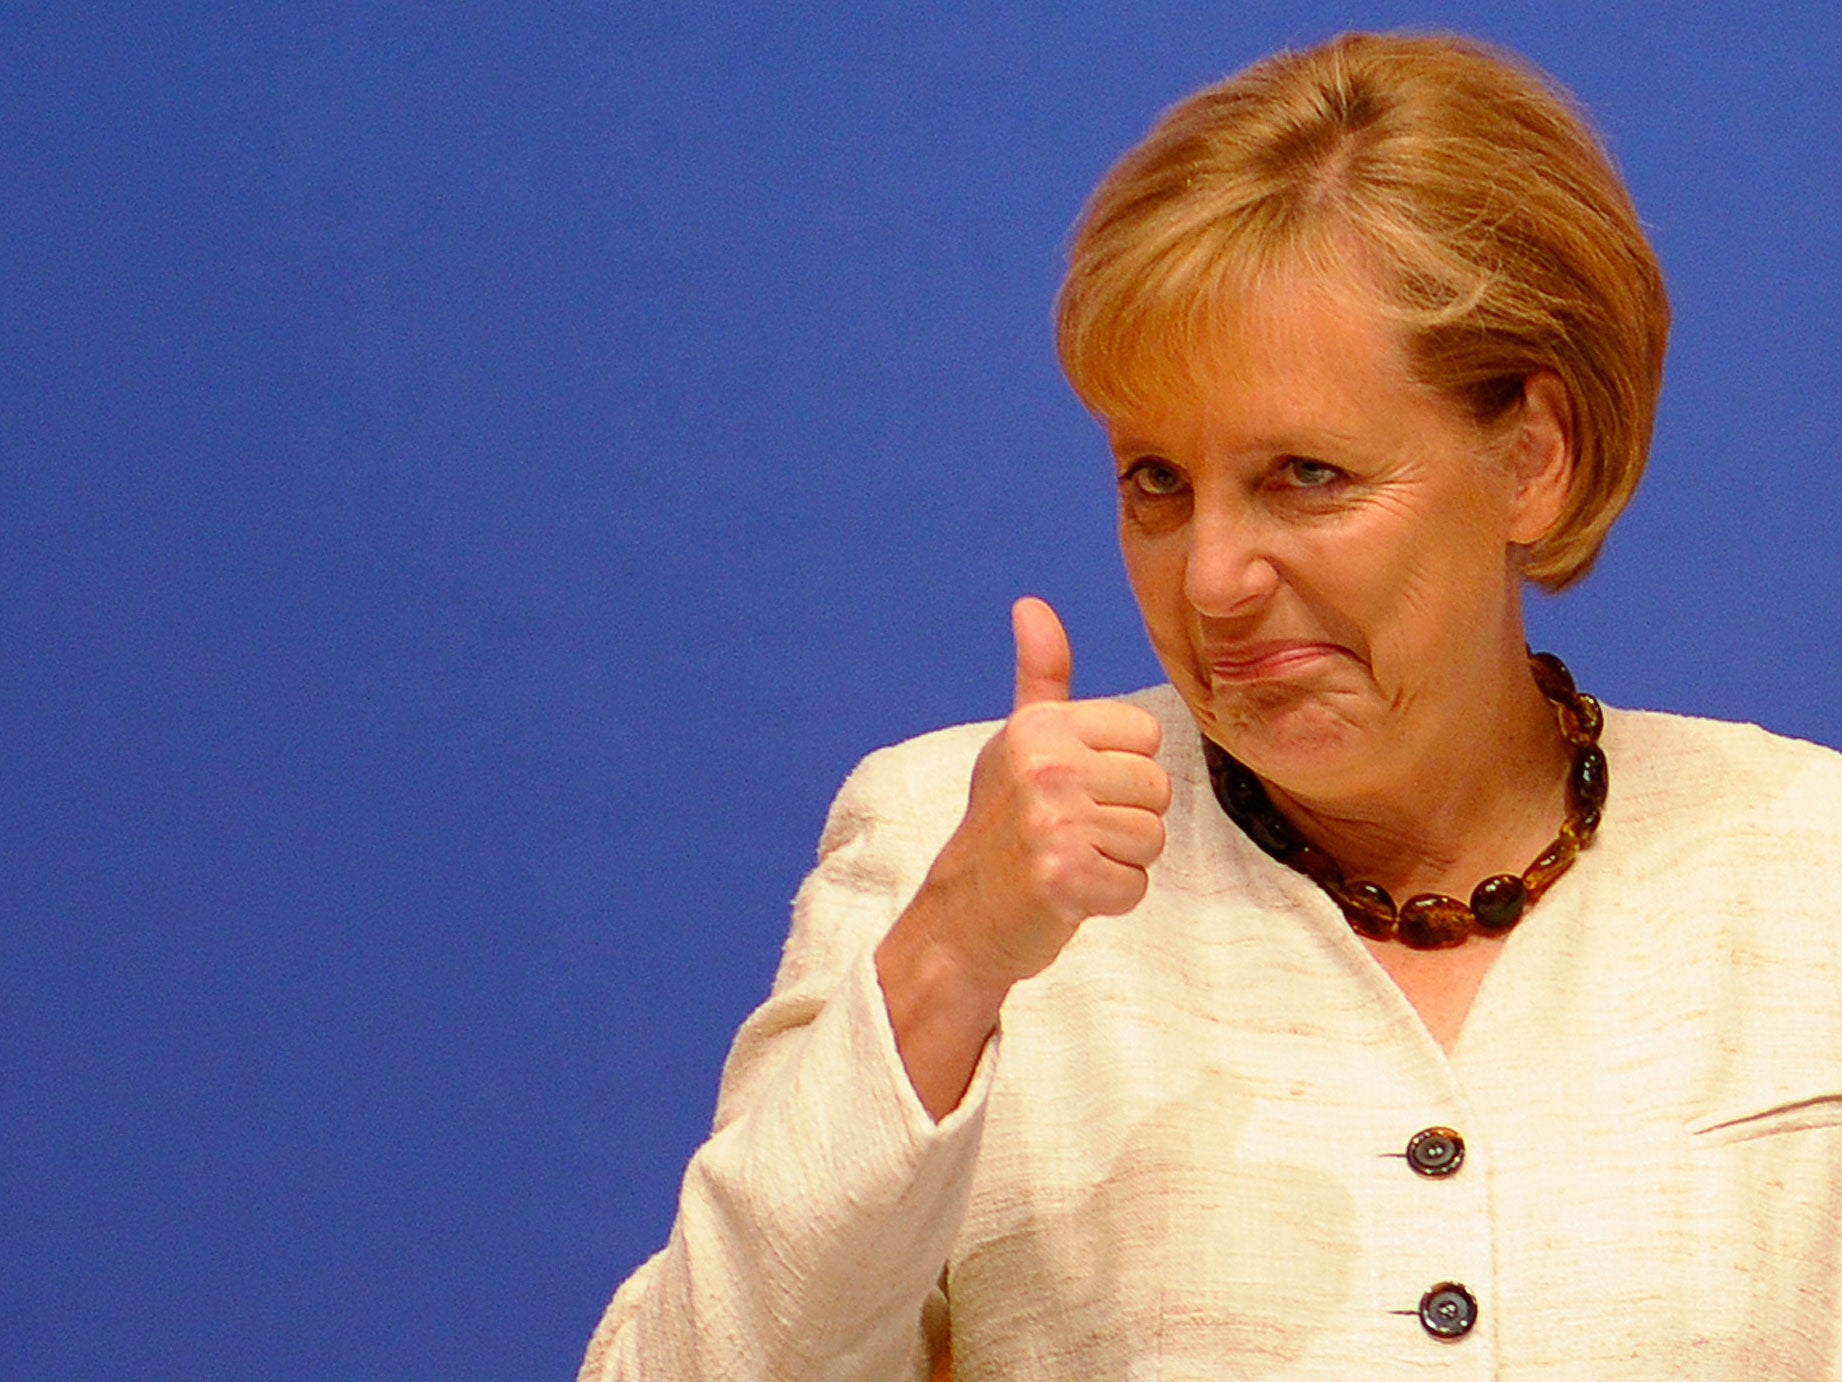 Most Germans agree with Chancellor Angela Merkel on Greece